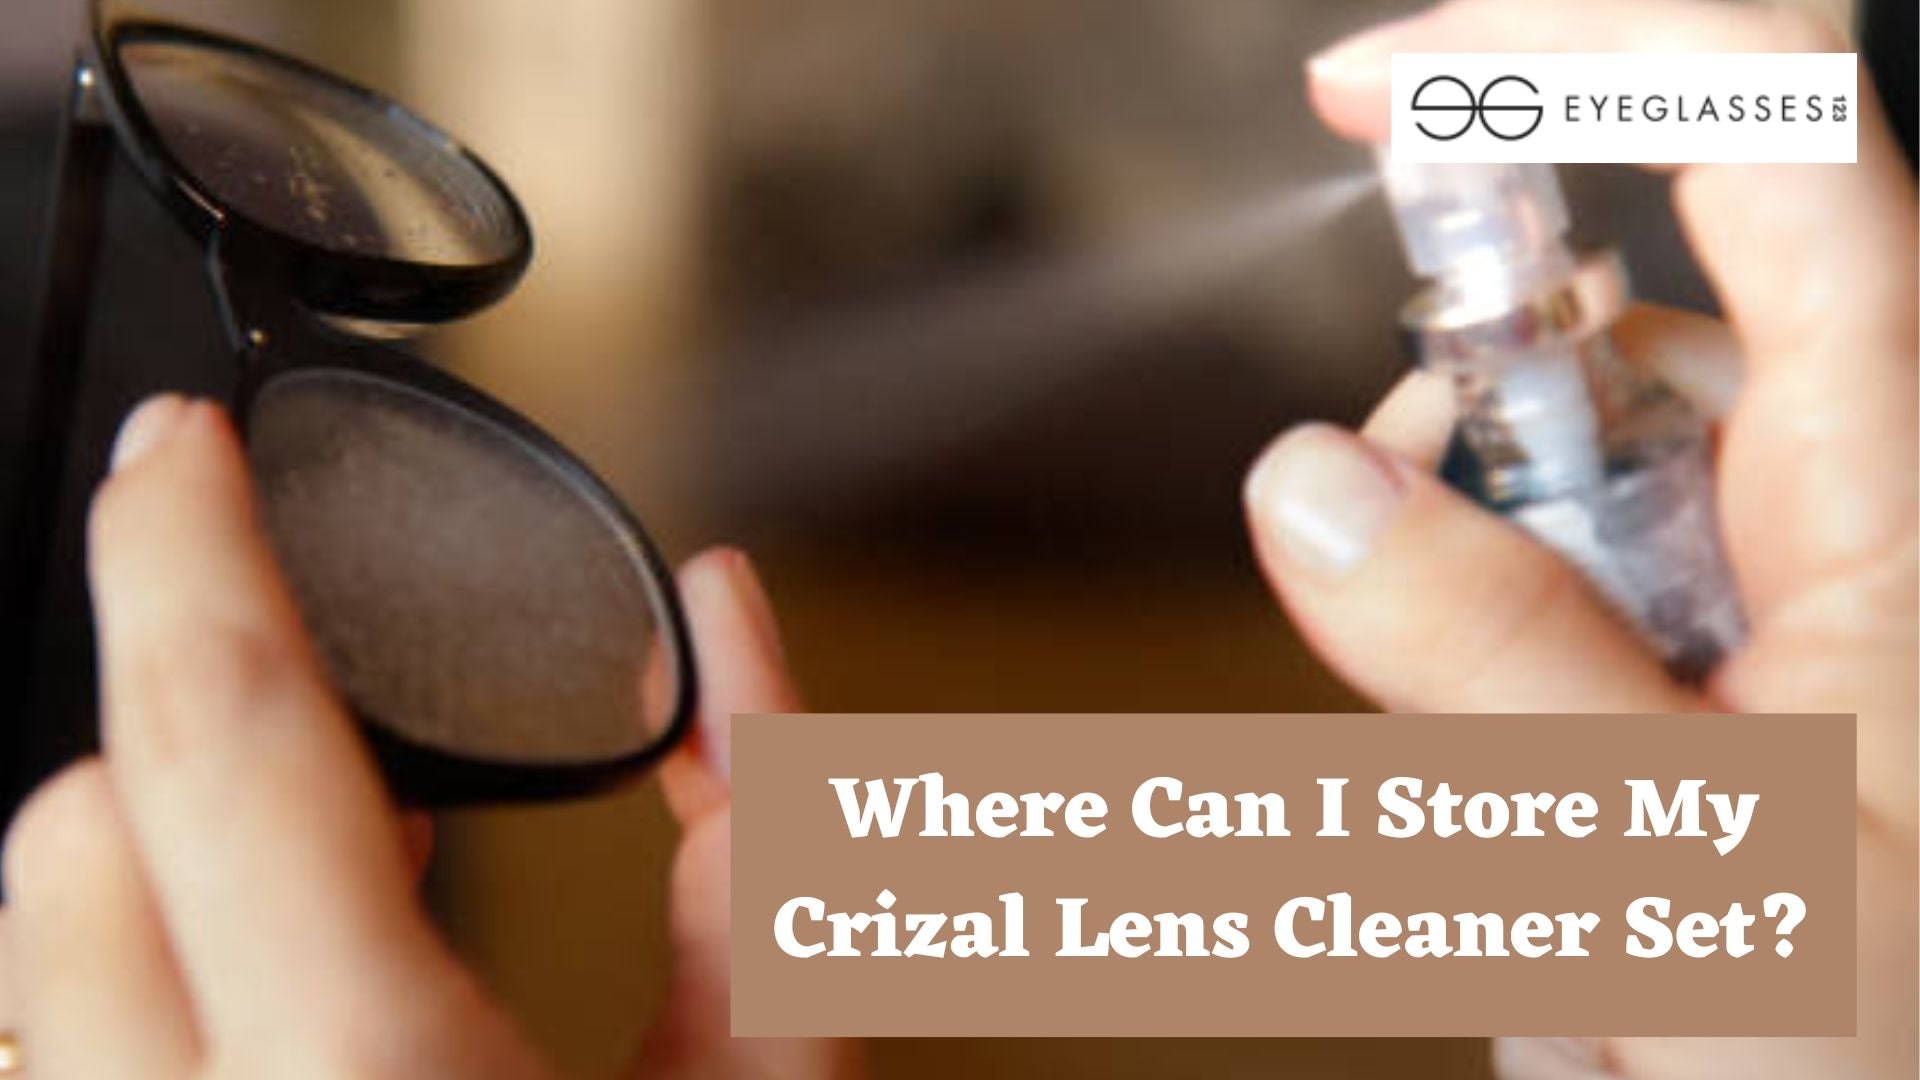 Where Can I Store My Crizal Lens Cleaner Set?